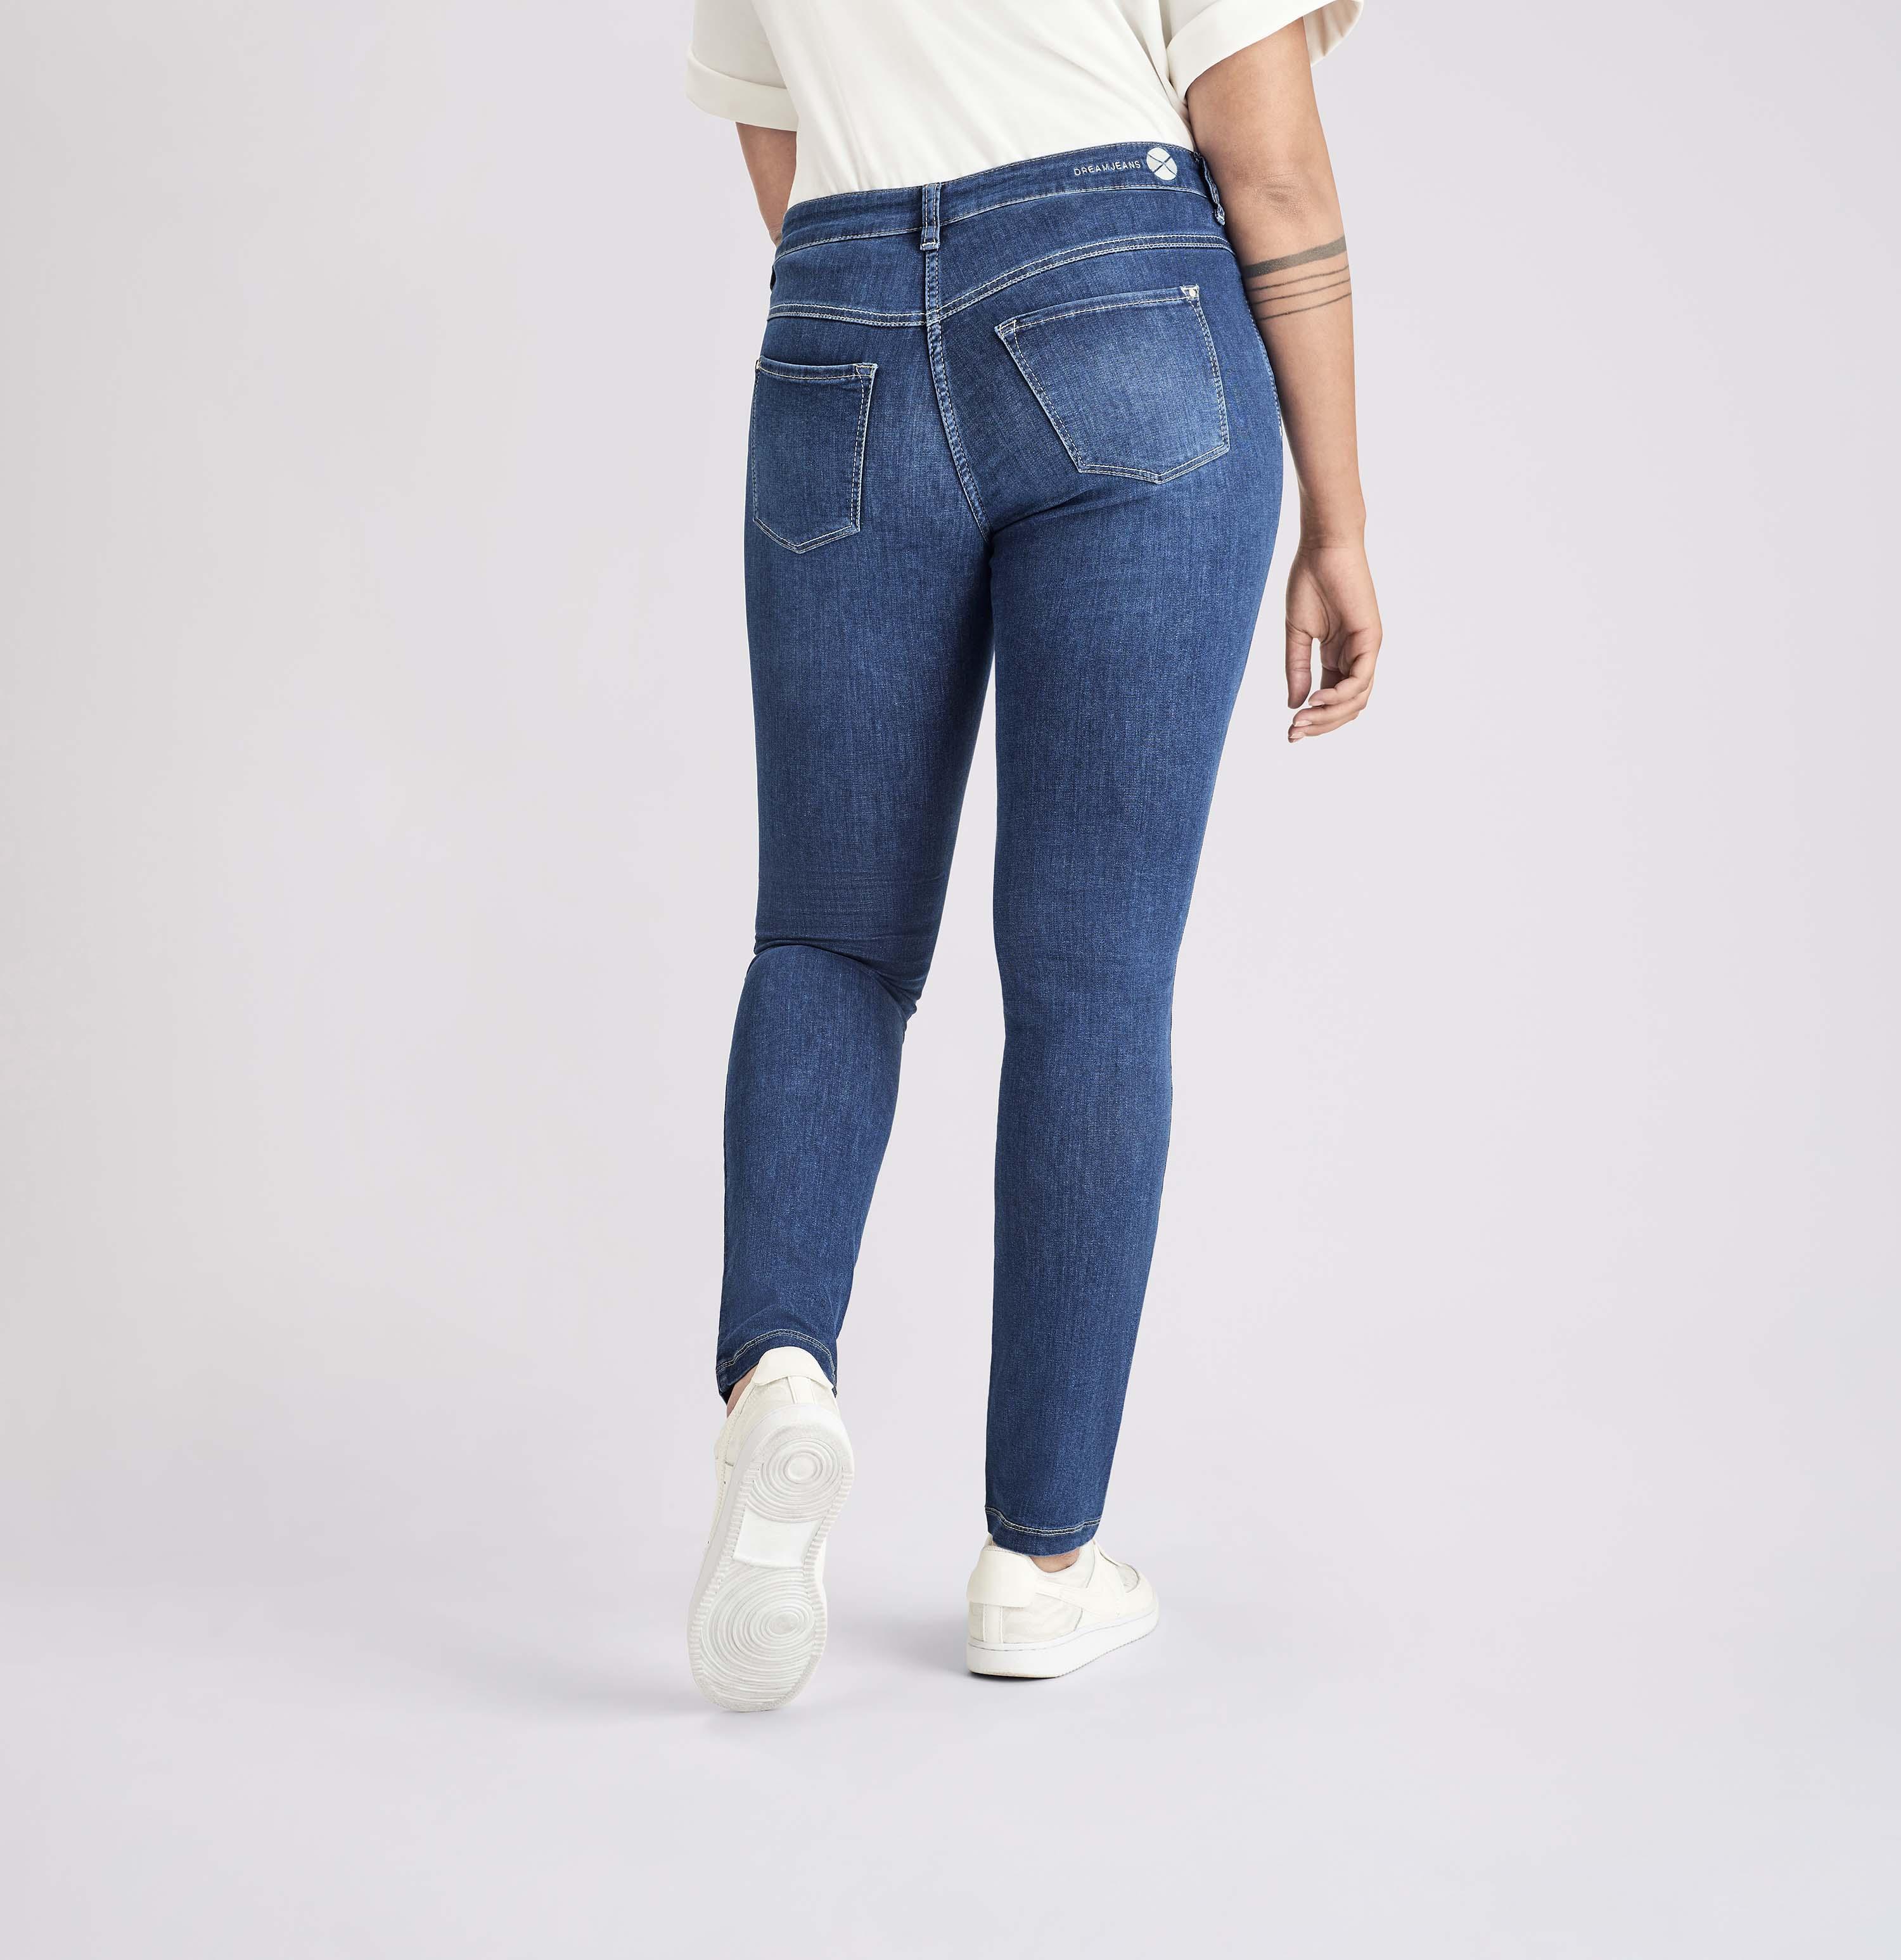 DREAM SKINNY JEANS - MID BLUE AUTHENTIC WASH